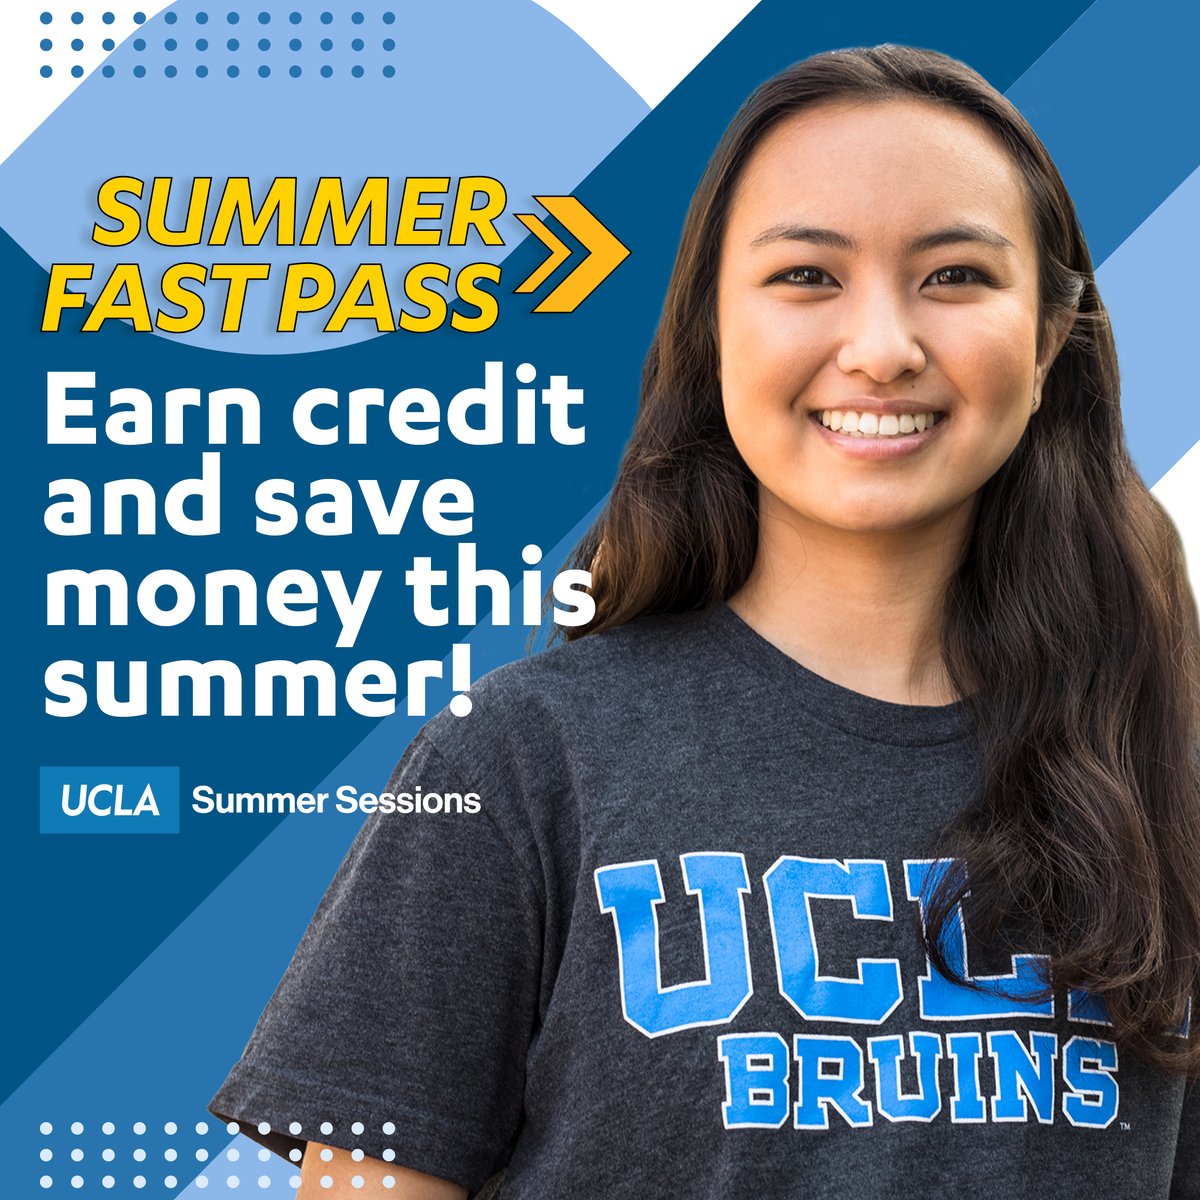 Looking for a way to free up your academic year? Check out Summer Fast Pass! With strategically-paired courses that help you earn credit towards your major or minor, Summer Fast Pass allows students to jump ahead while saving money over the summer. bit.ly/summerfastpass